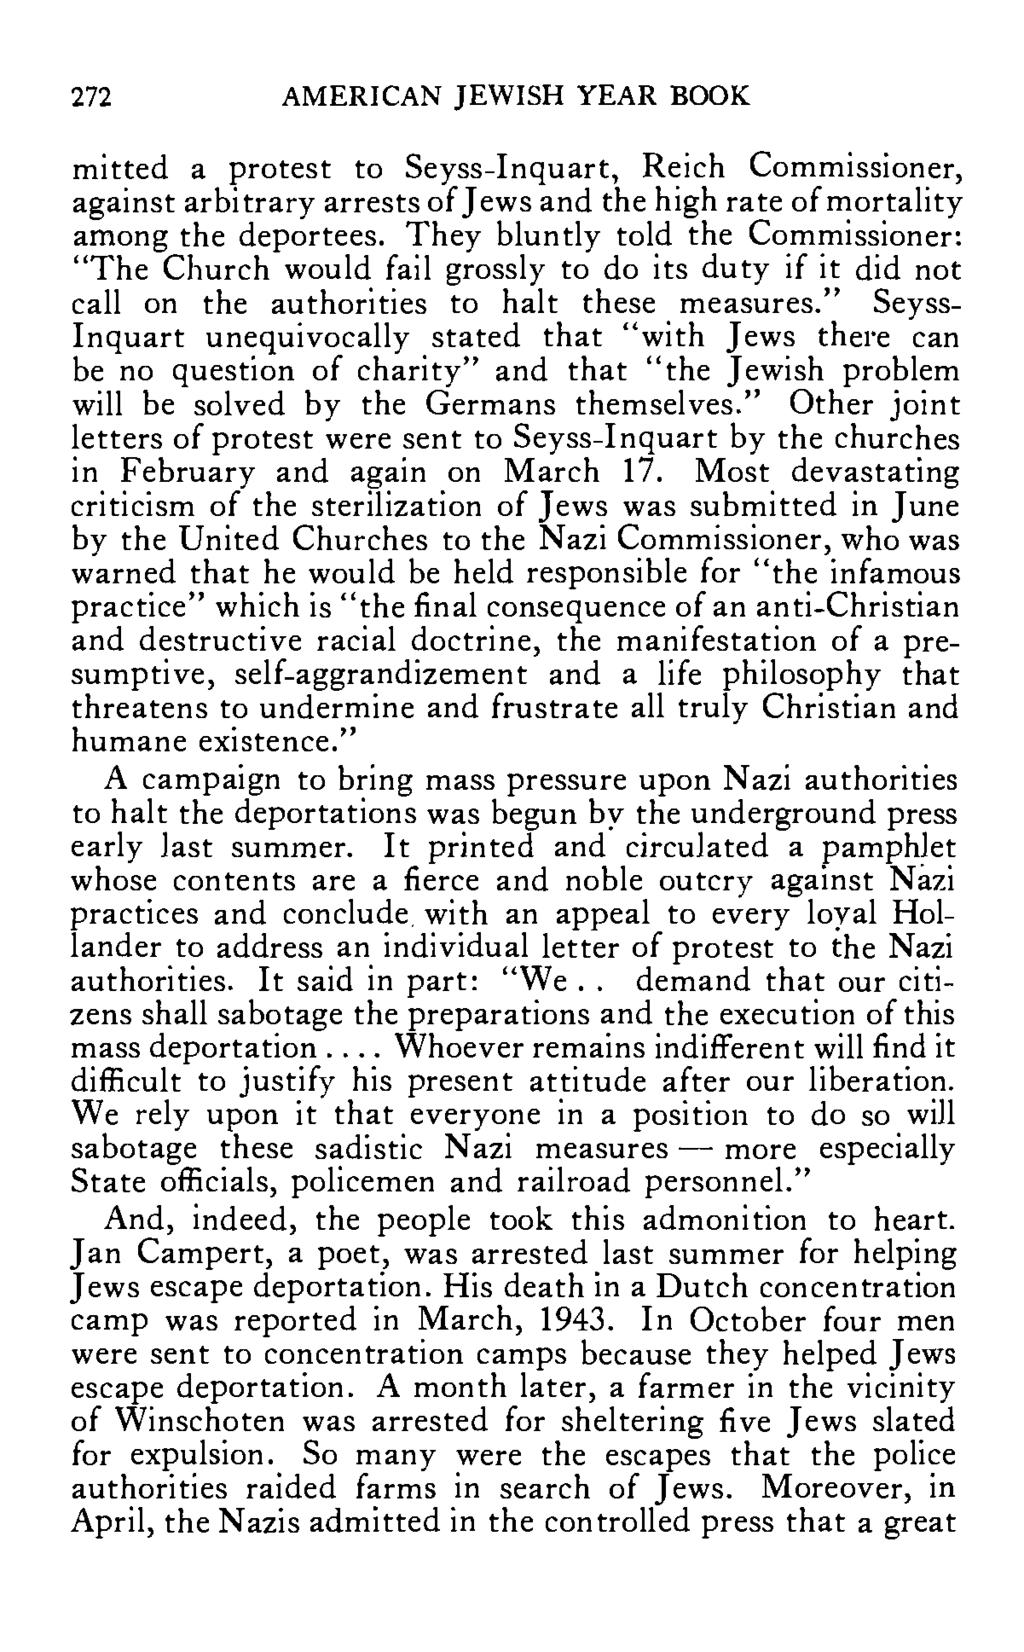 272 AMERICAN JEWISH YEAR BOOK mitted a protest to Seyss-Inquart, Reich Commissioner, against arbitrary arrests of Jews and the high rate of mortality among the deportees.